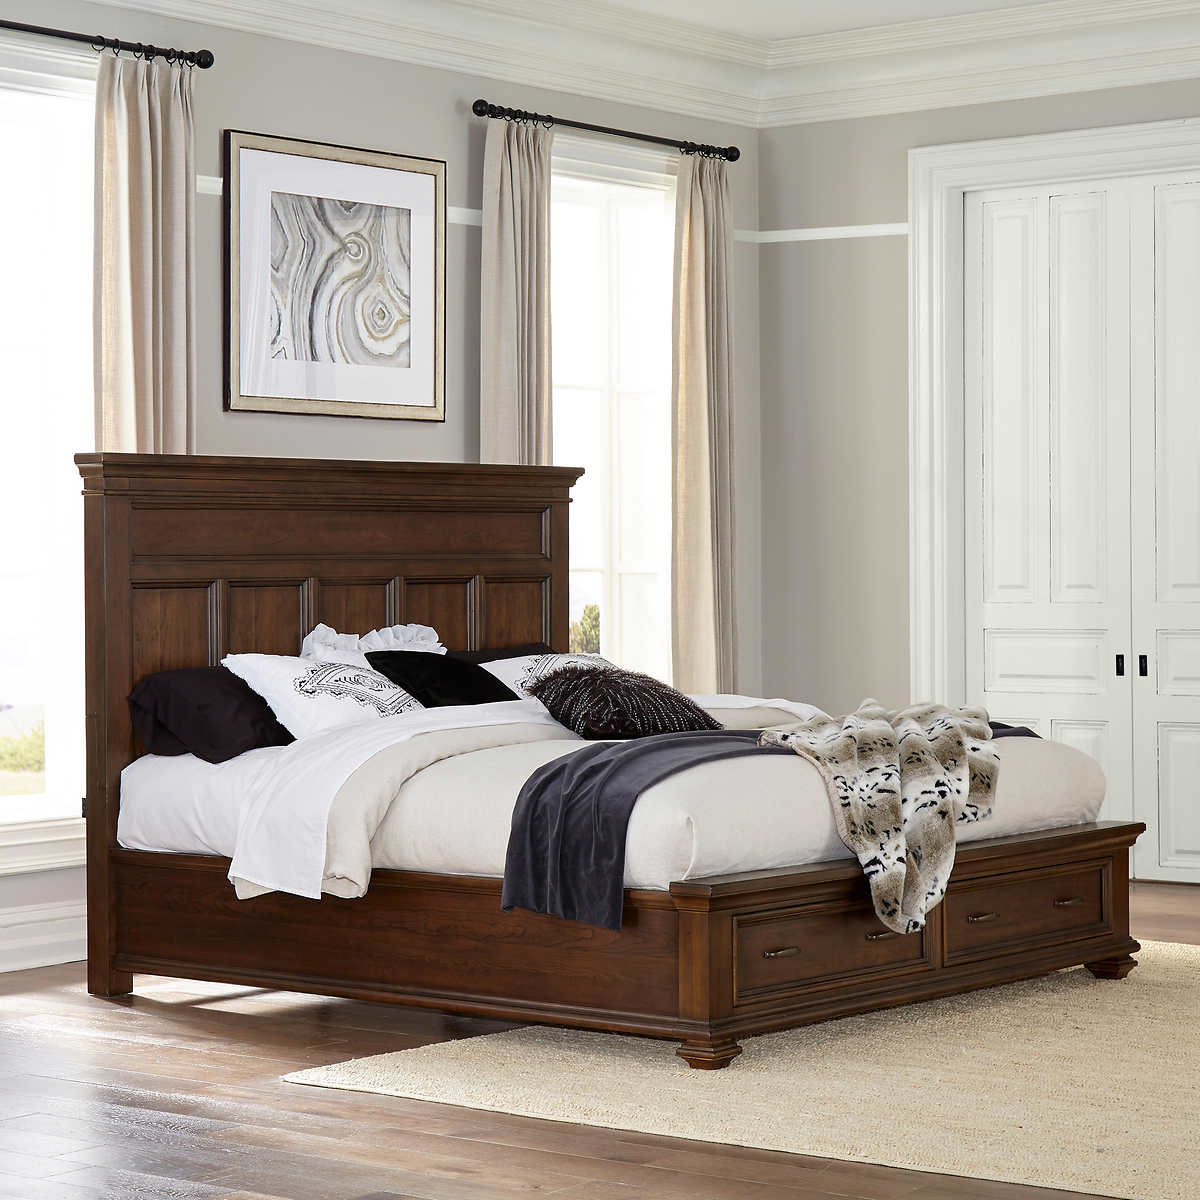 Conner King Storage Bed Costco, Costco Bed Frame